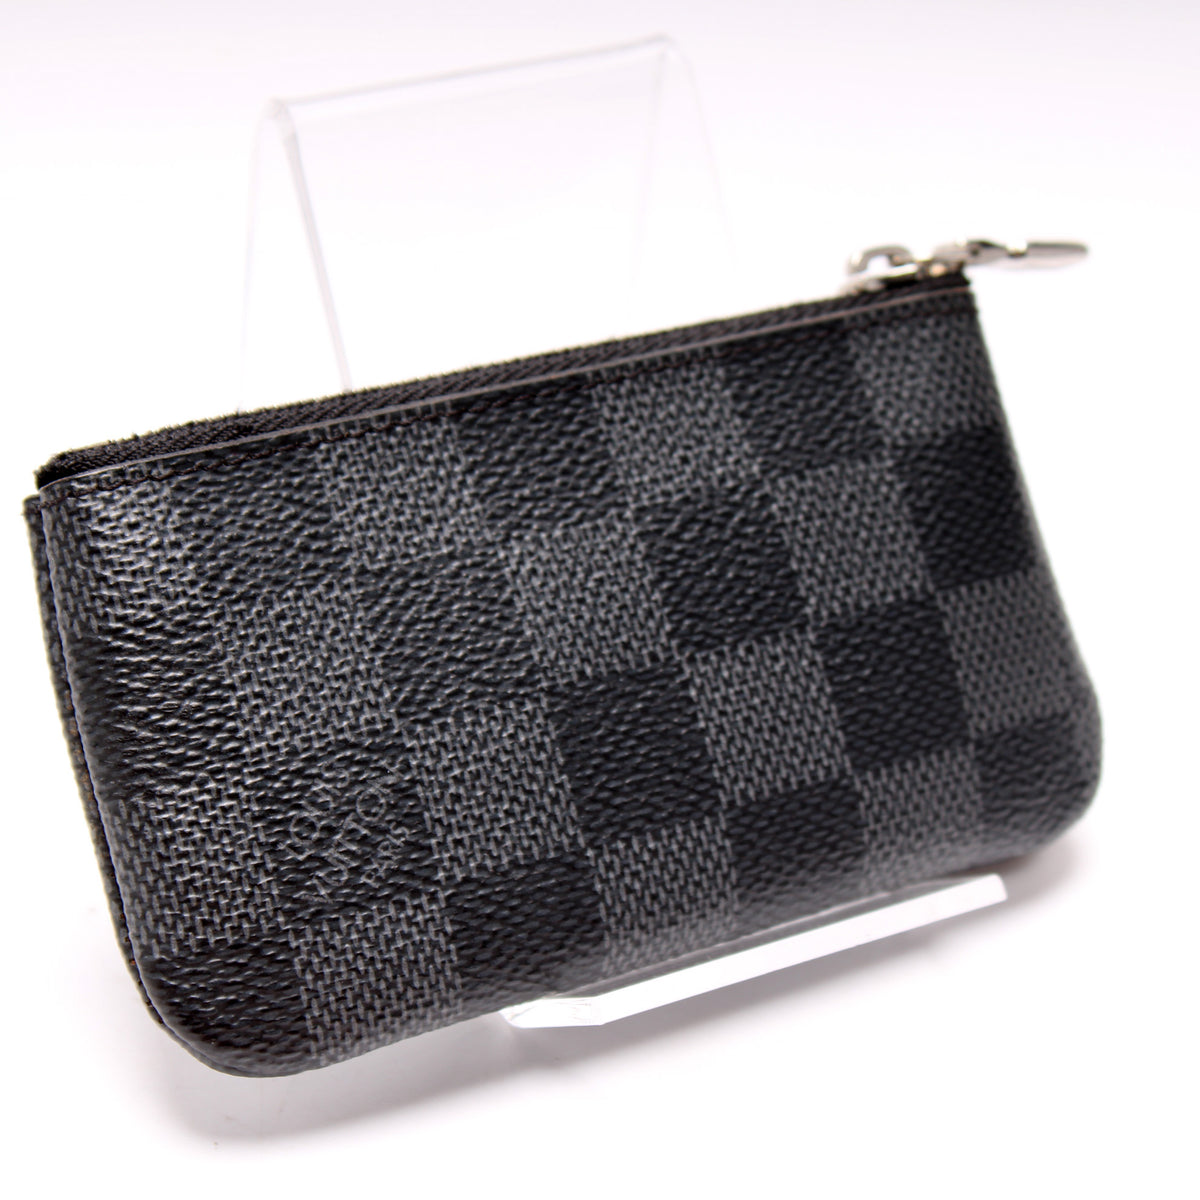 Key Pouch Damier Graphite - Wallets and Small Leather Goods